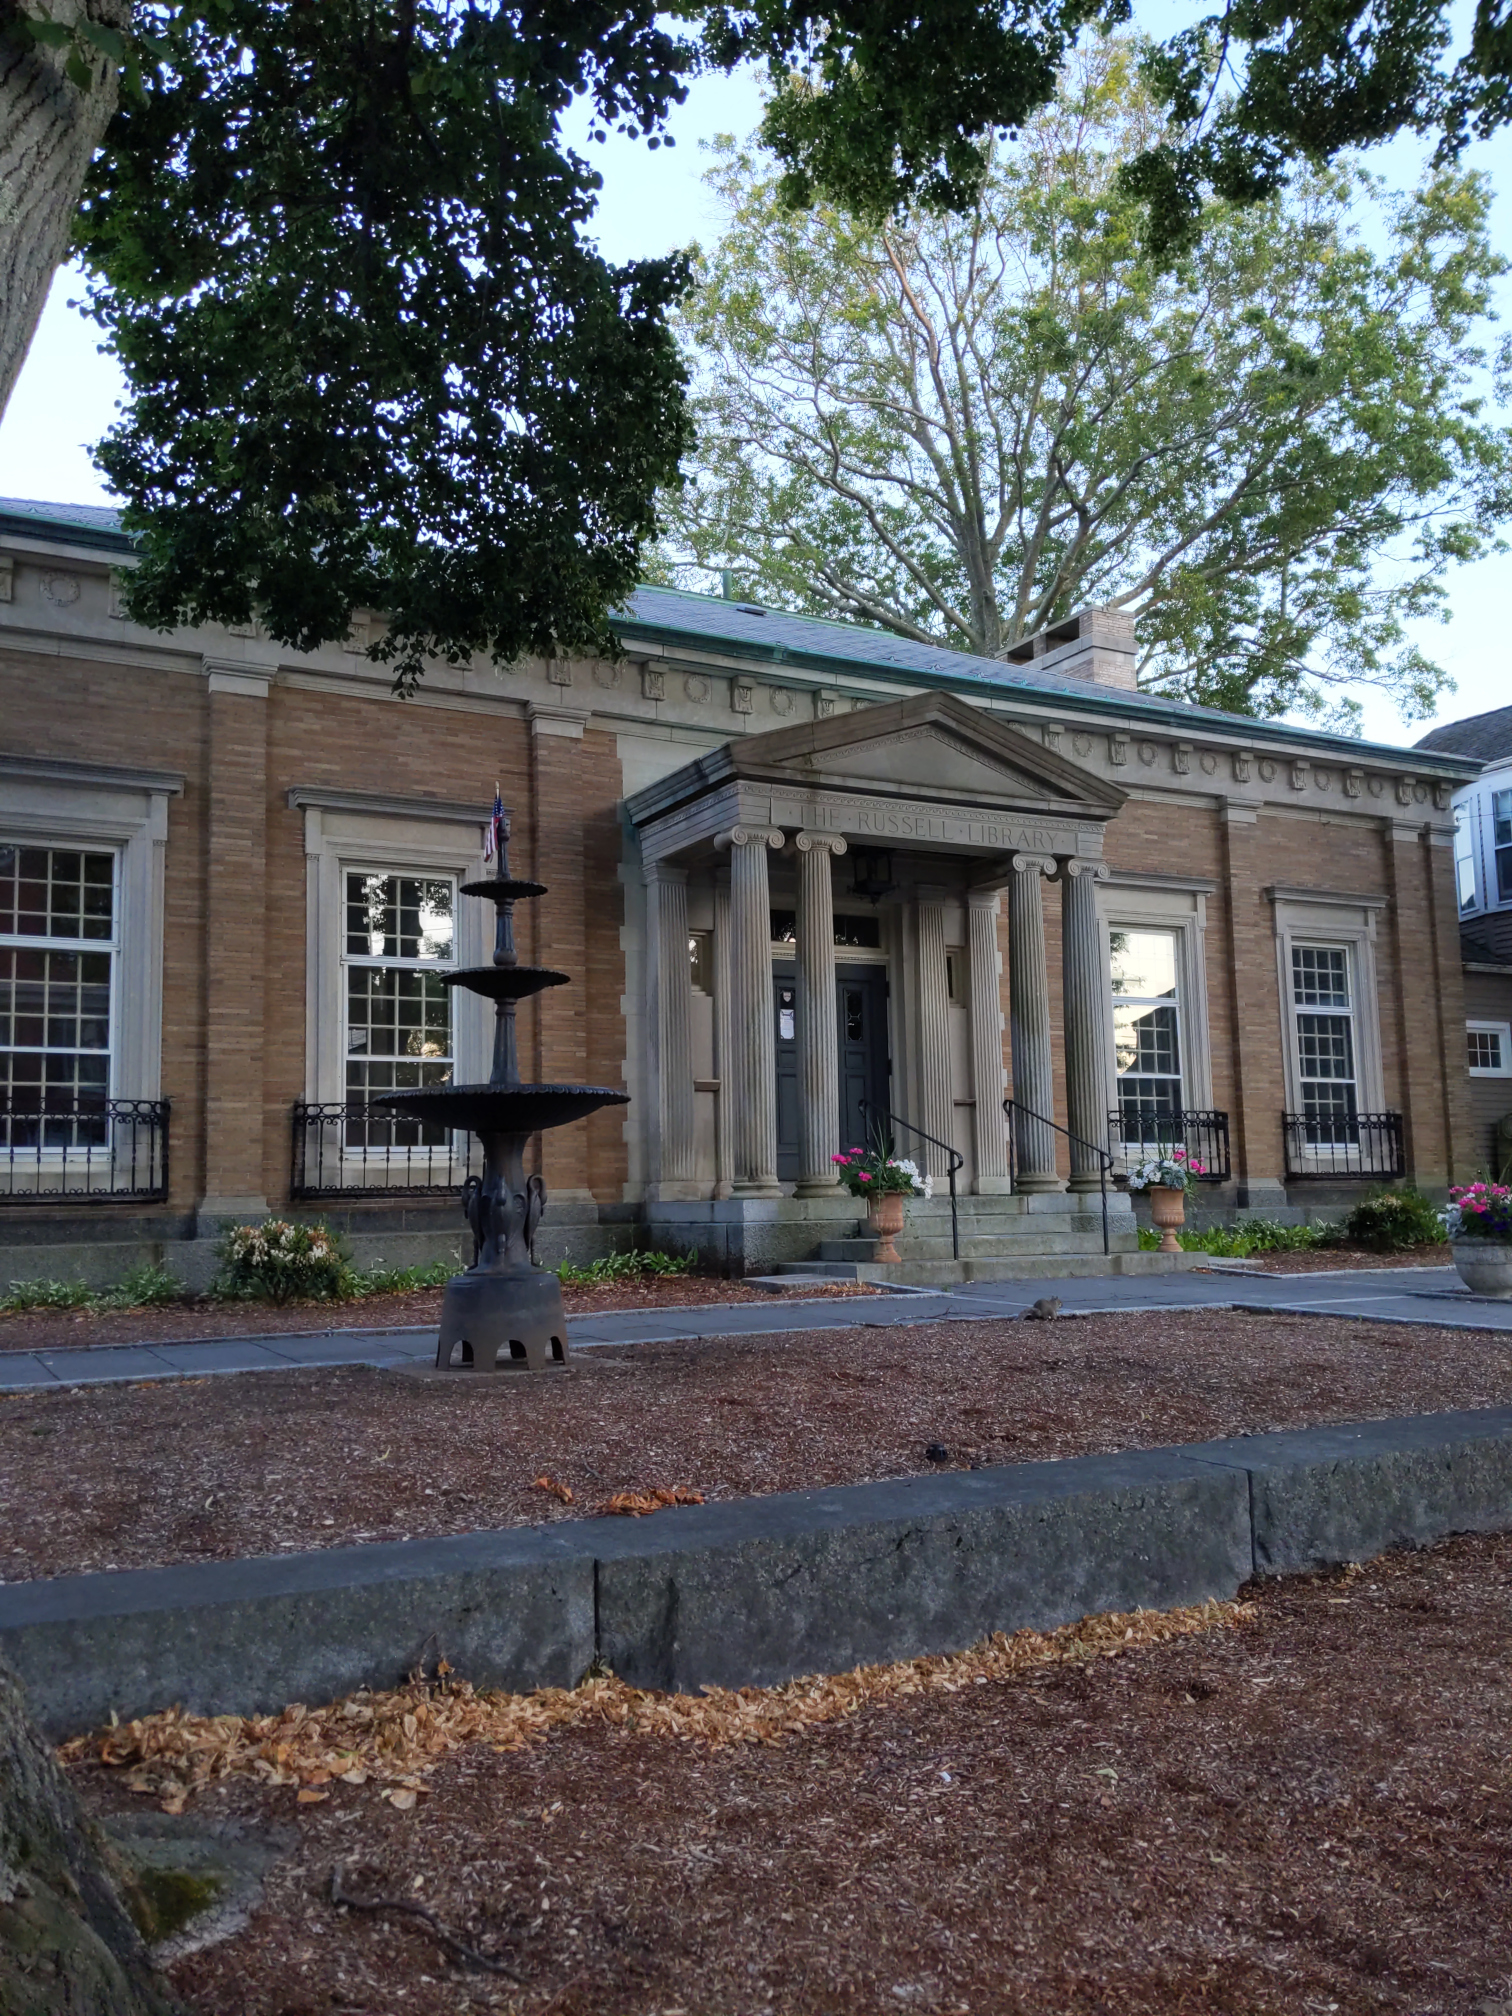 This is Russell Library in the Plymouth town center. The building has been around for about 100 years now.